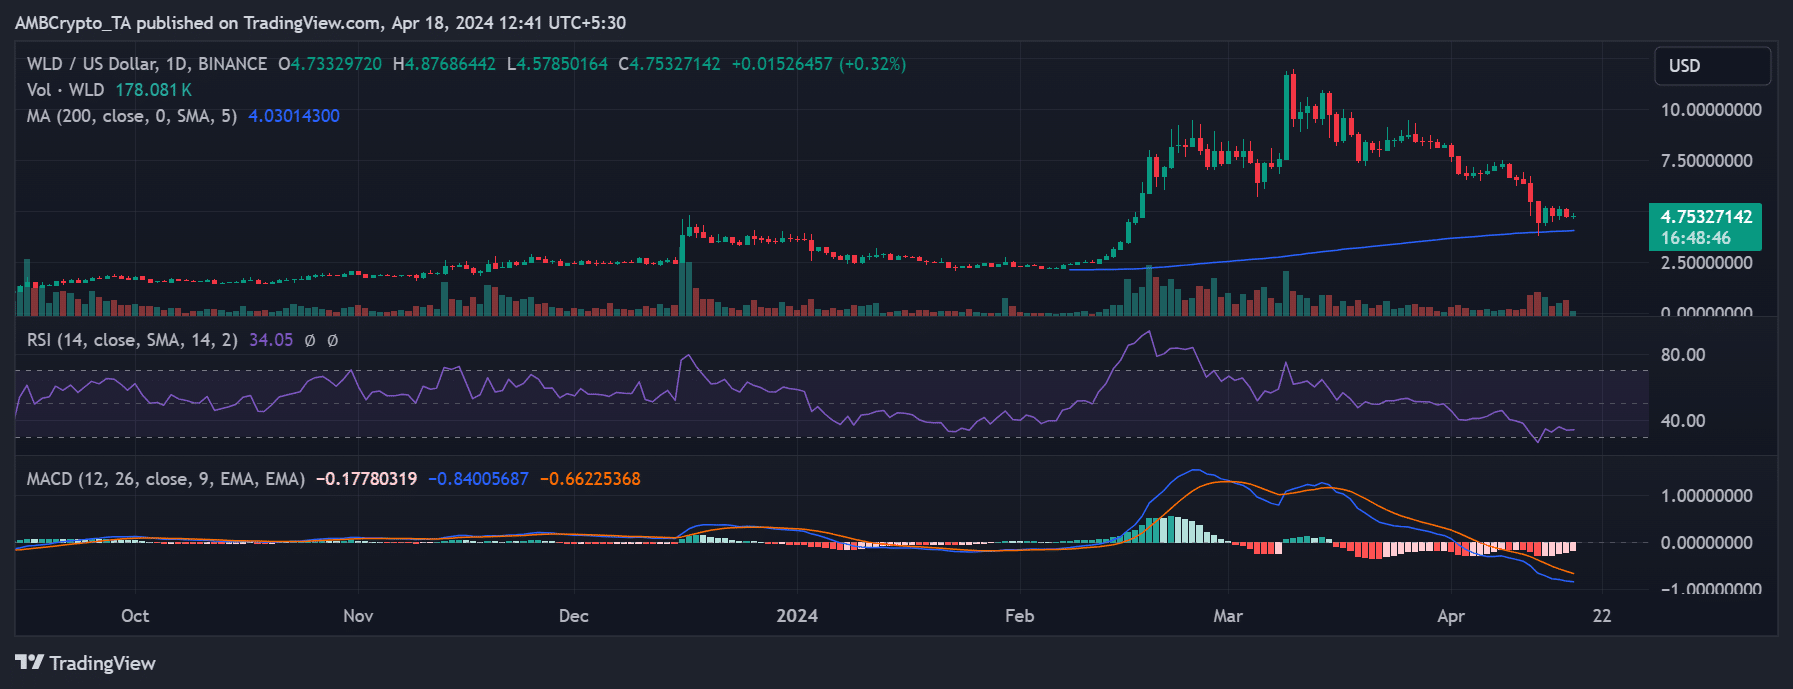 Worldcoin price trend